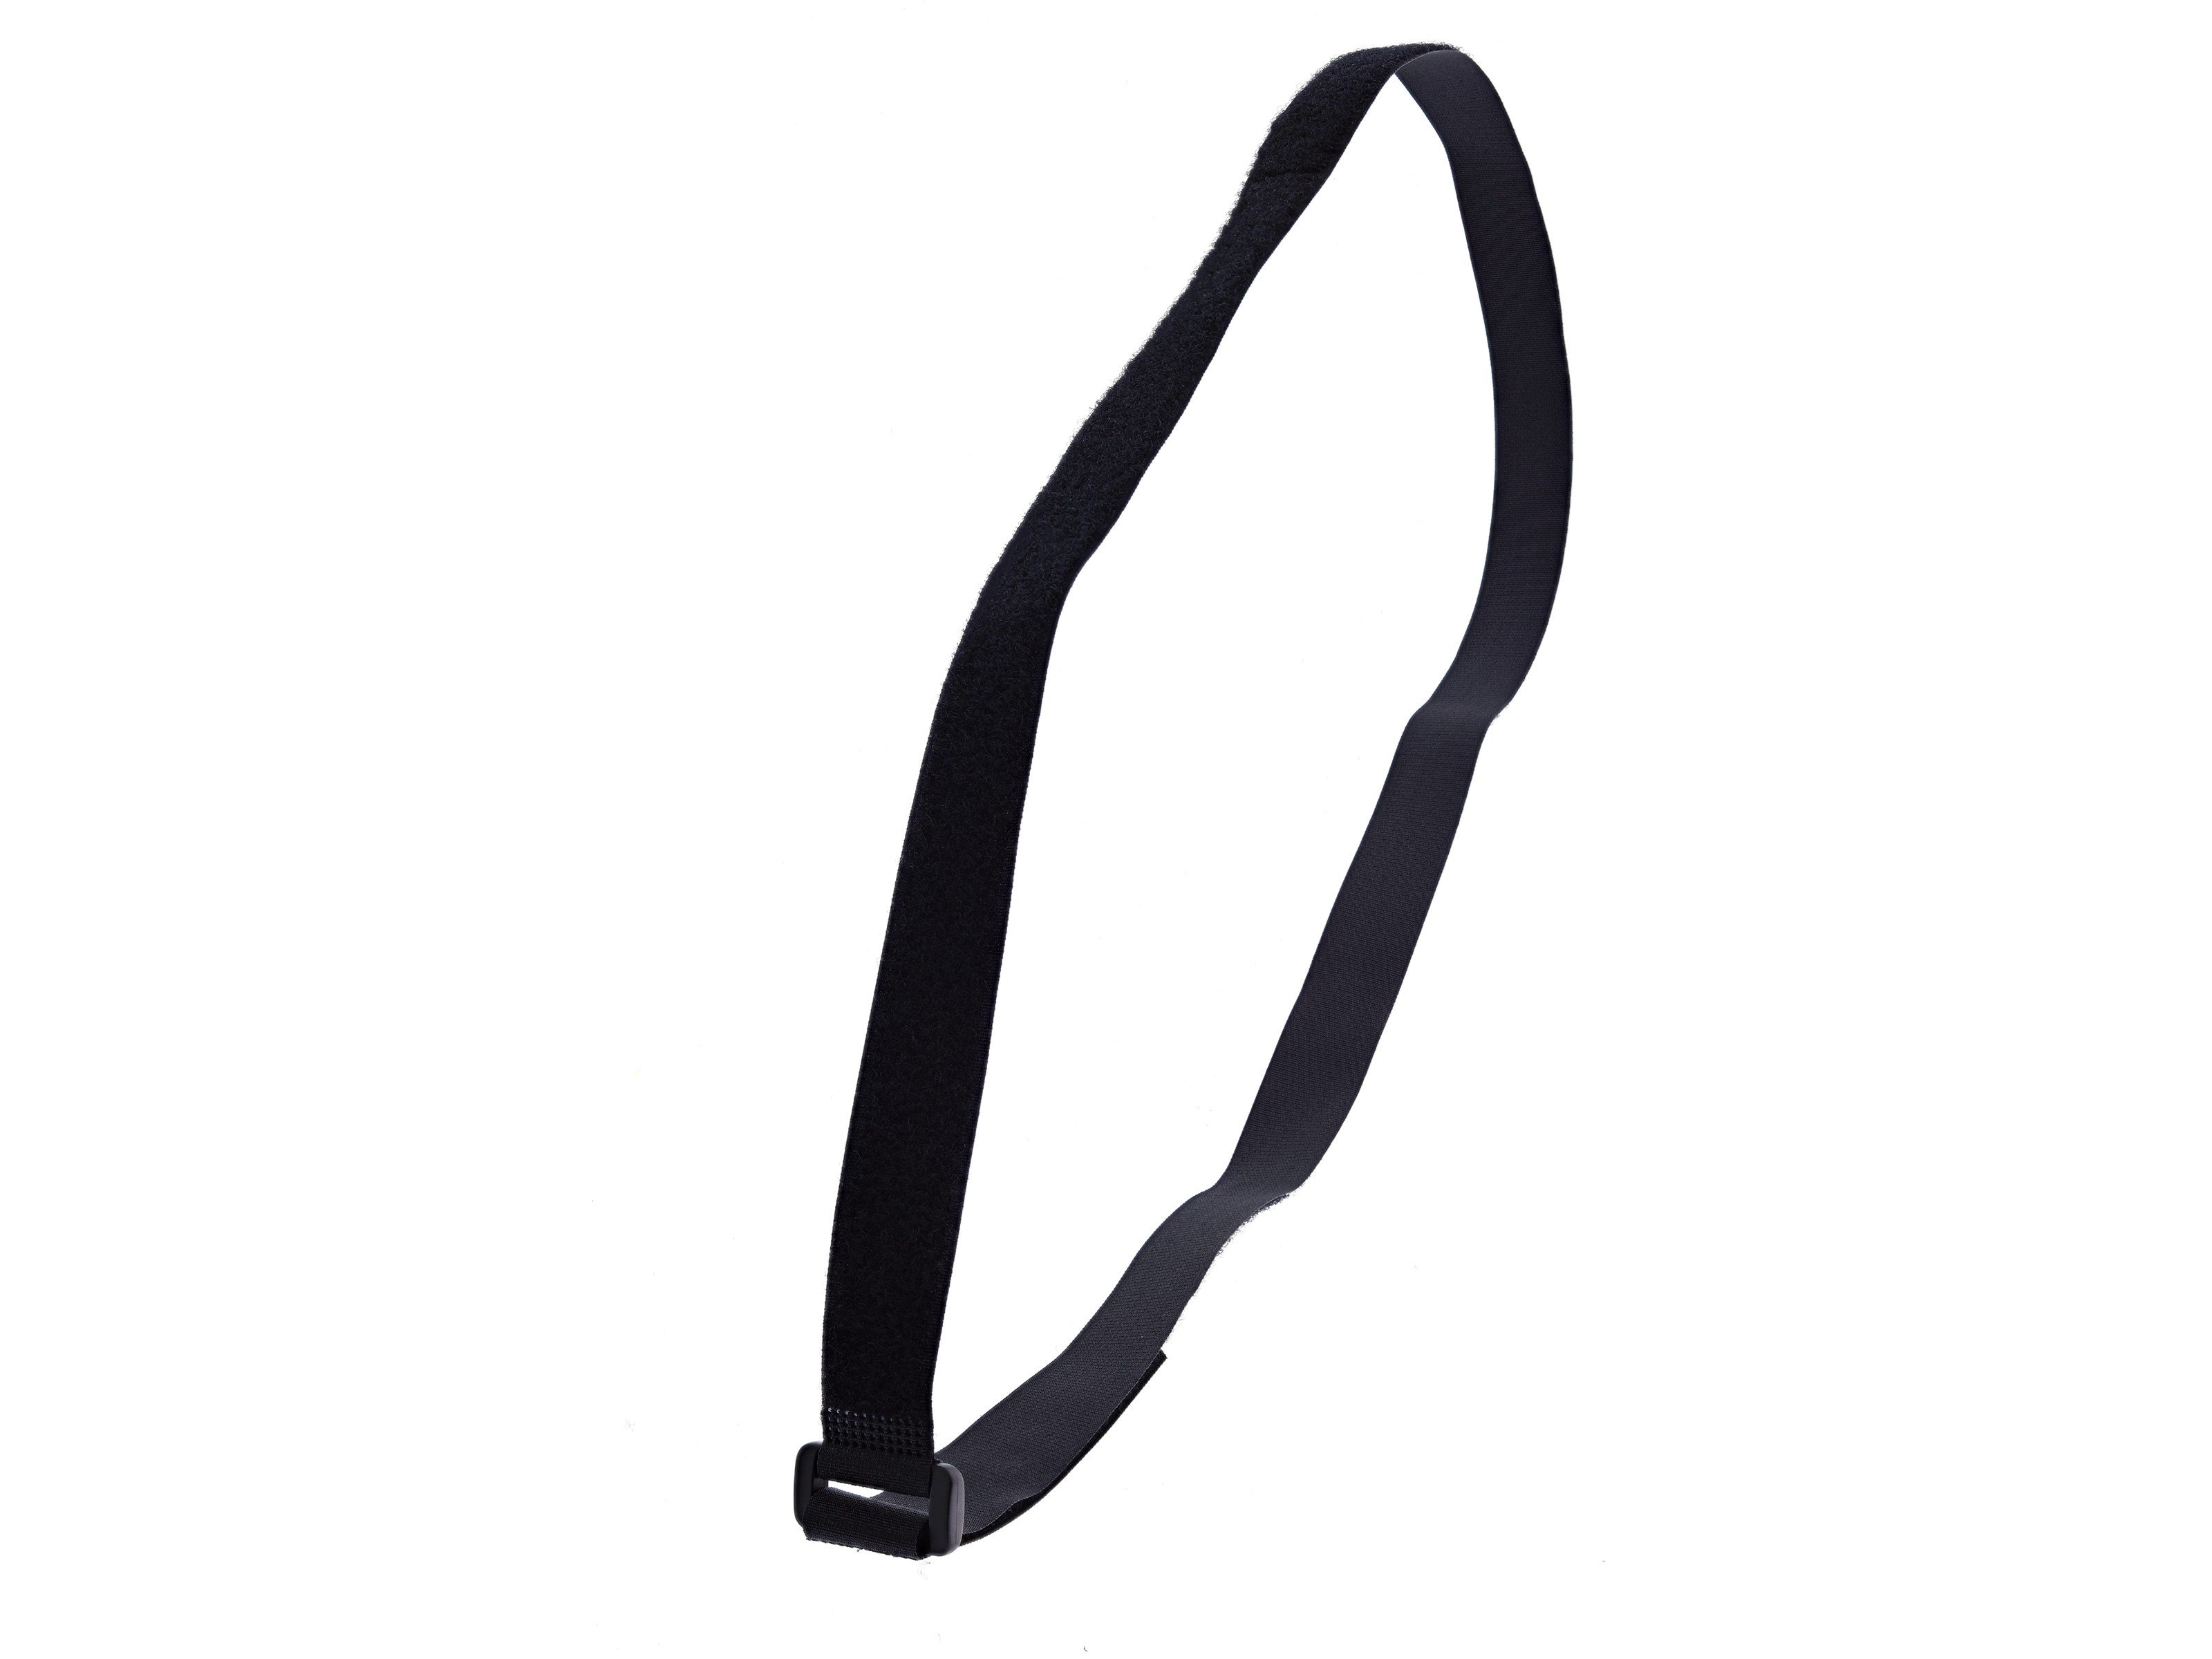 48 x 1 Inch Black Cinch Strap - 5 Pack - Secure™ Cable Ties